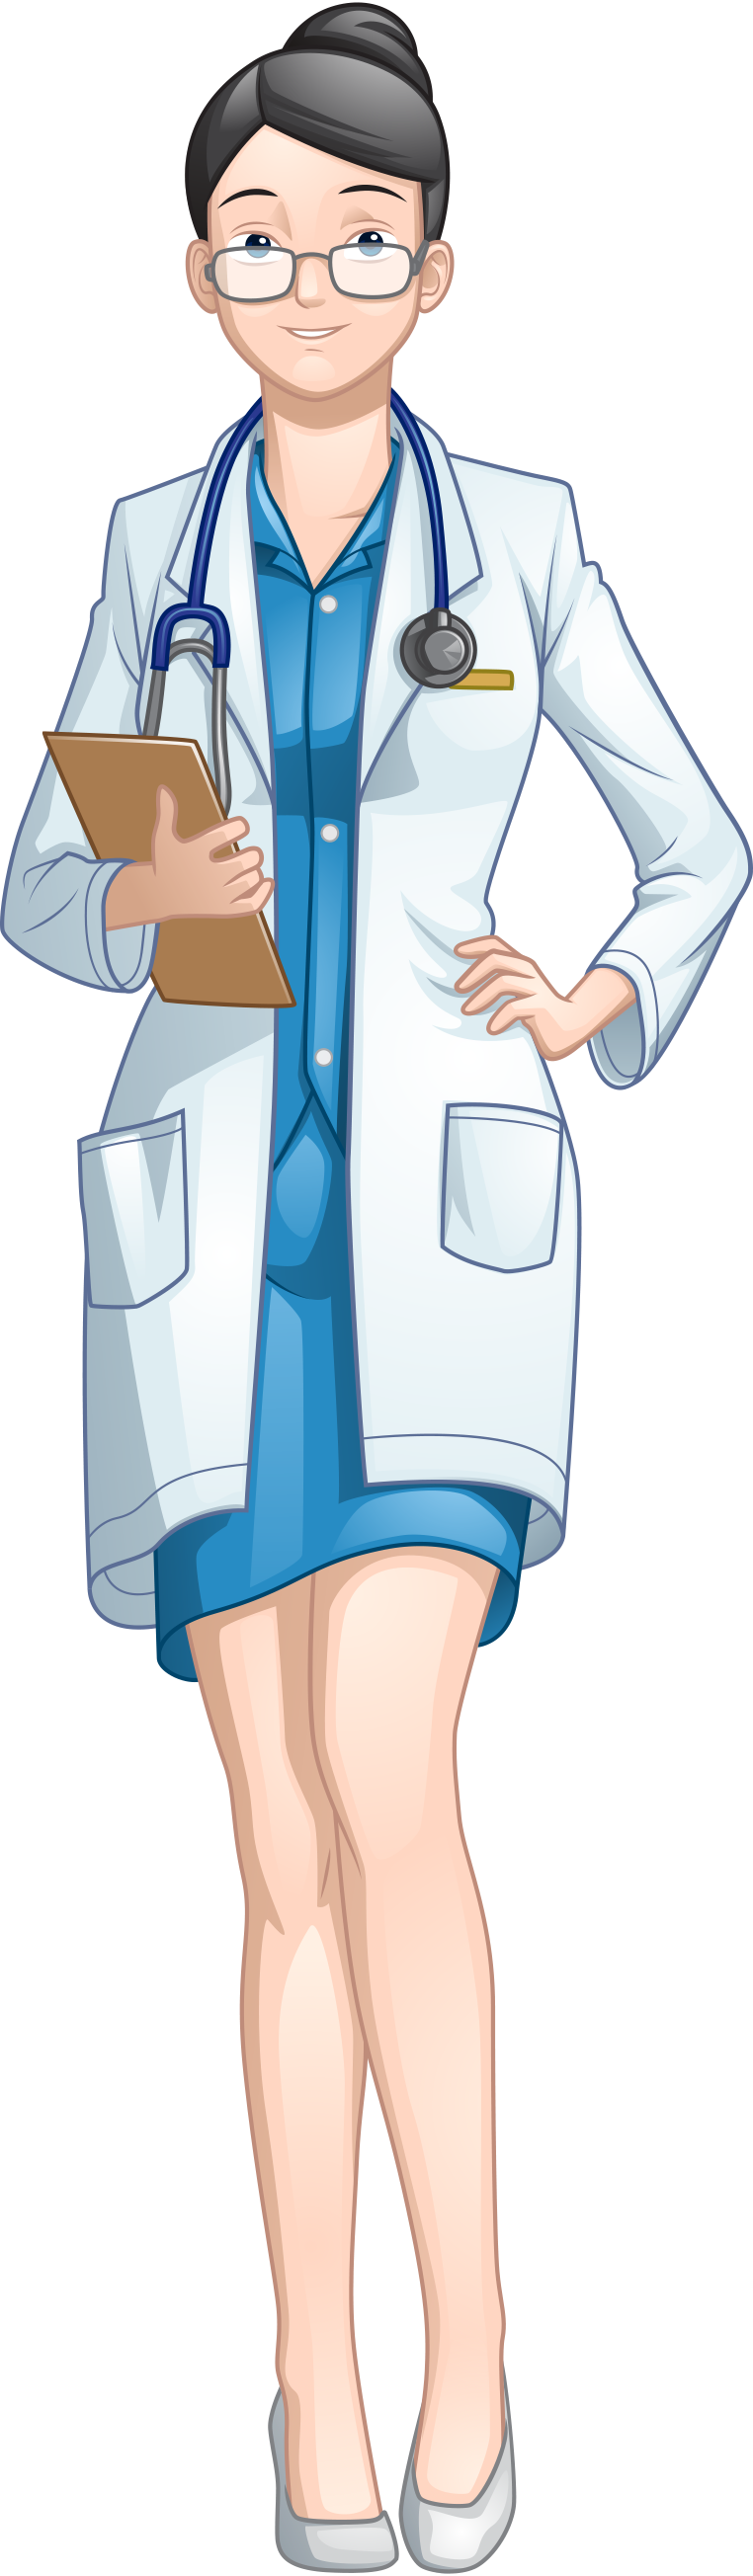 female-doctor-collection-2-001